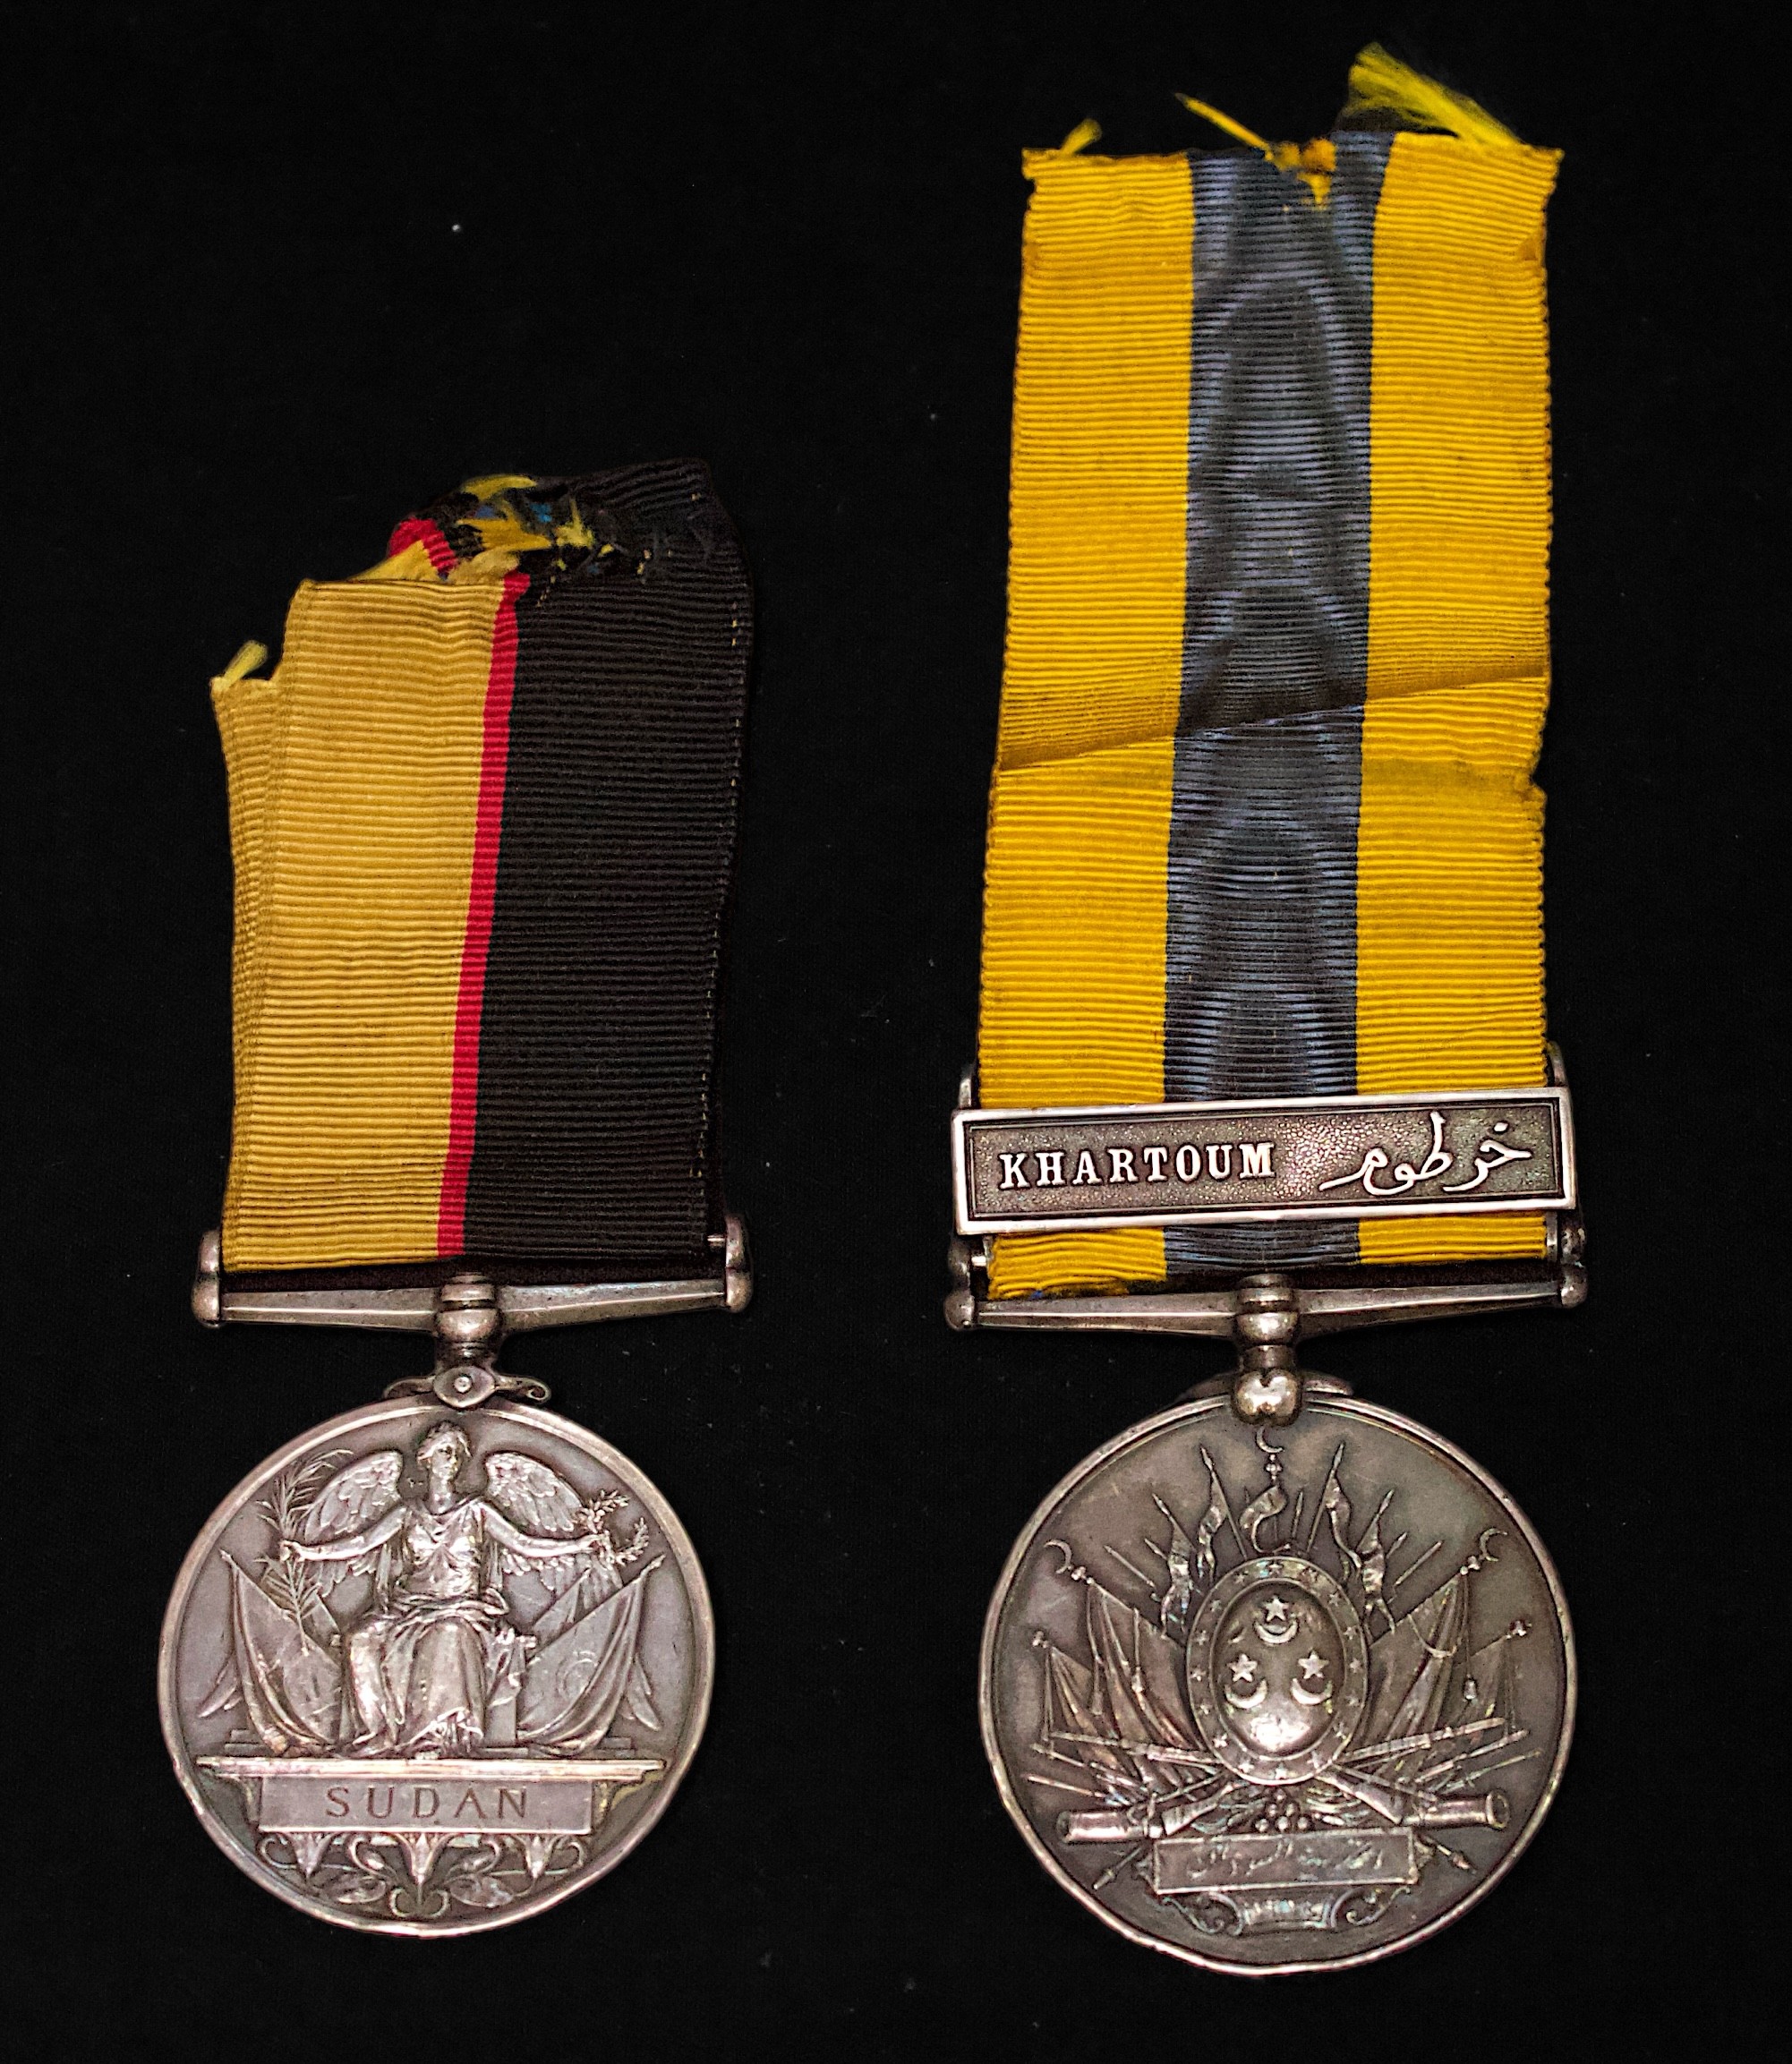 A Queen's Sudan 'Wound' Pair of Queen's Sudan Medal 1899 and Khedive's Sudan Medal with Khartoum - Image 2 of 5